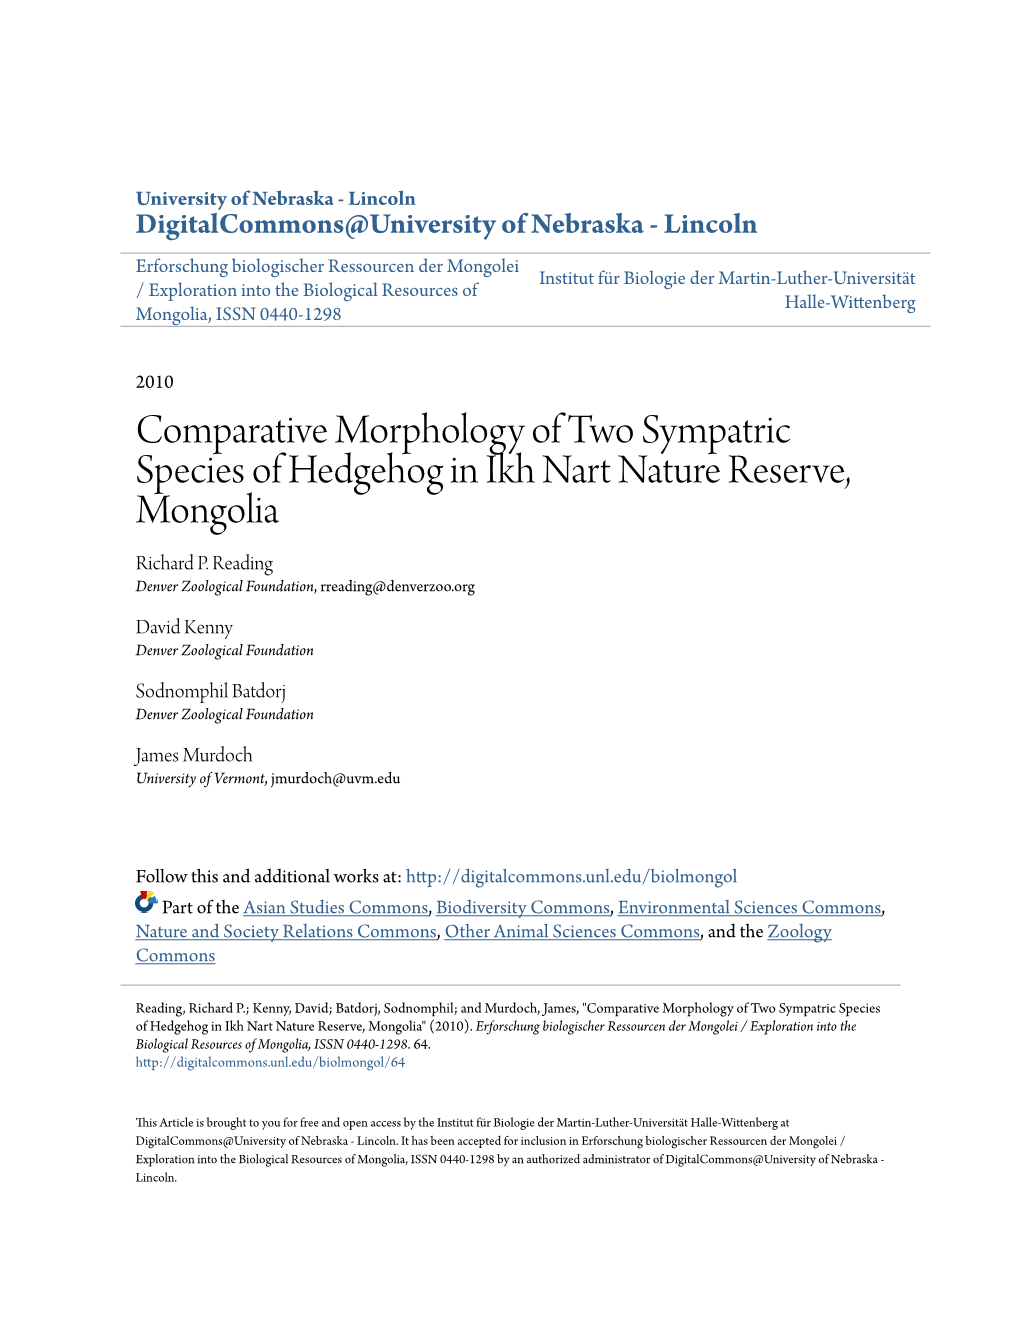 Comparative Morphology of Two Sympatric Species of Hedgehog in Ikh Nart Nature Reserve, Mongolia Richard P